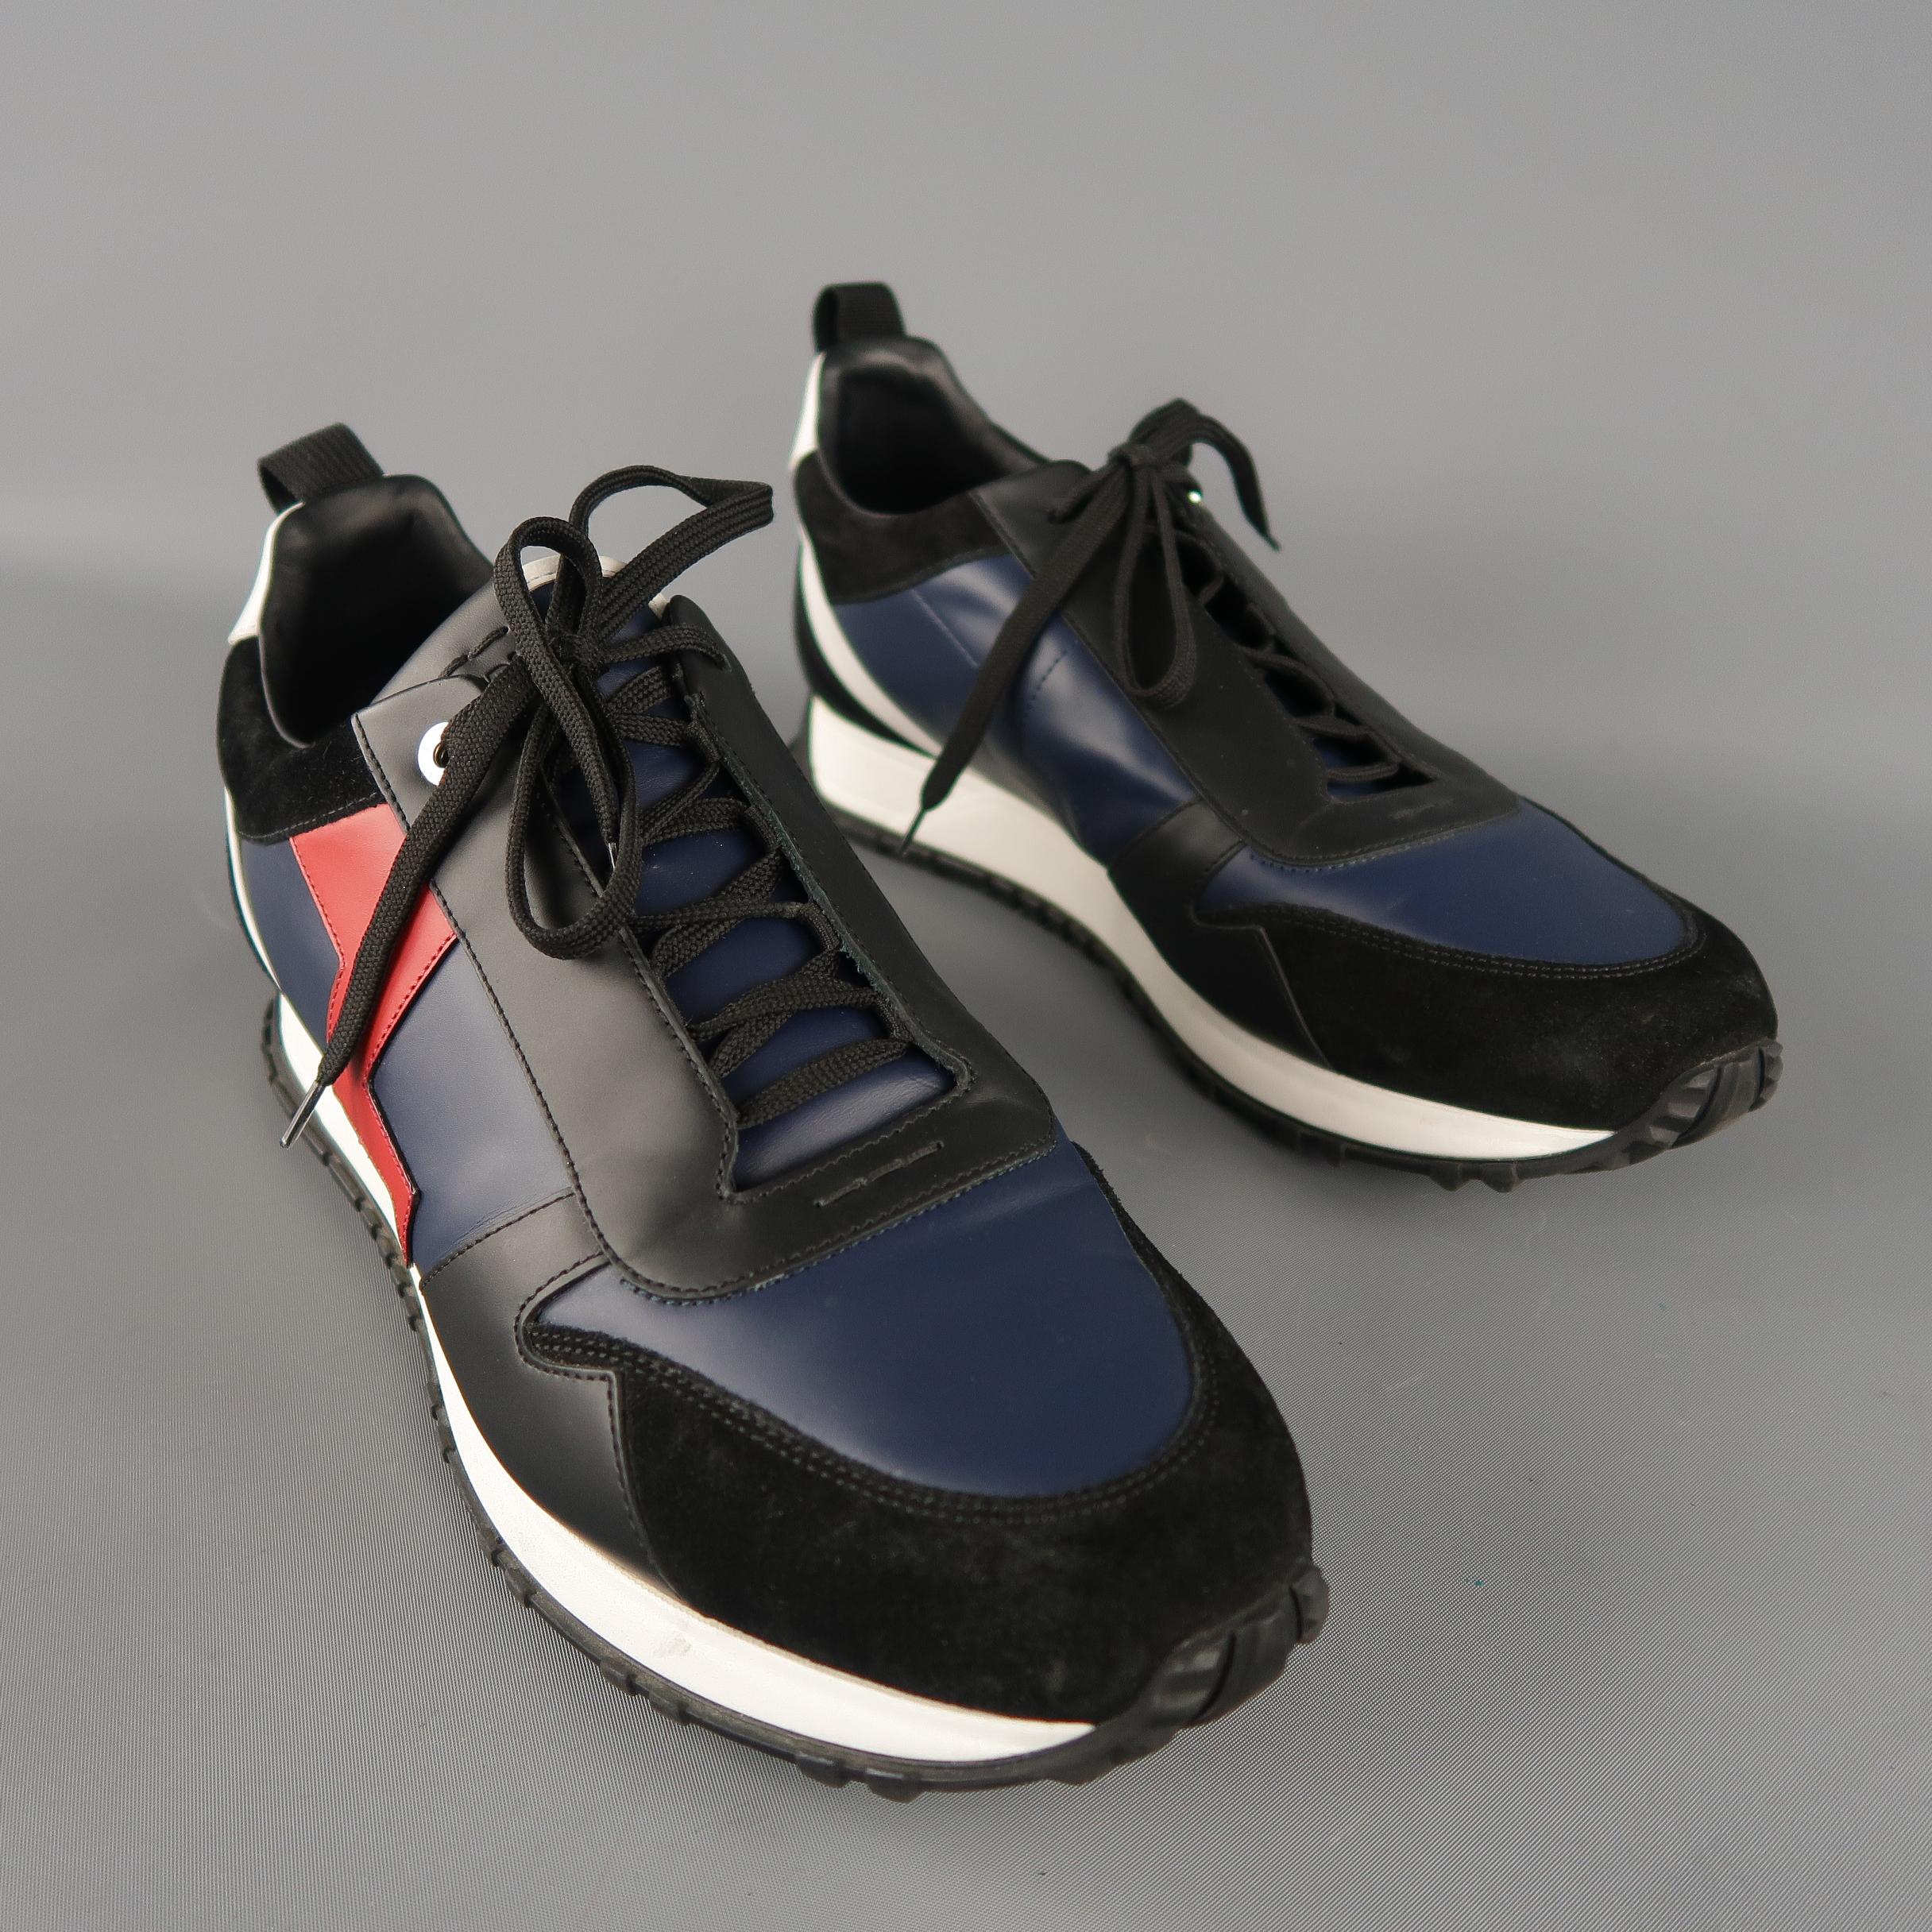 FENDI lightning bolt applique sneakers are in black and navy color block leather, with a brand embossed tongue, suede trim, lace up. With Box. Made in Italy. Retail price: 750.00
 
Excellent Pre-Owned Condition.
Marked: 9 UK
 
Outsole: 12.5  x 3 in.
